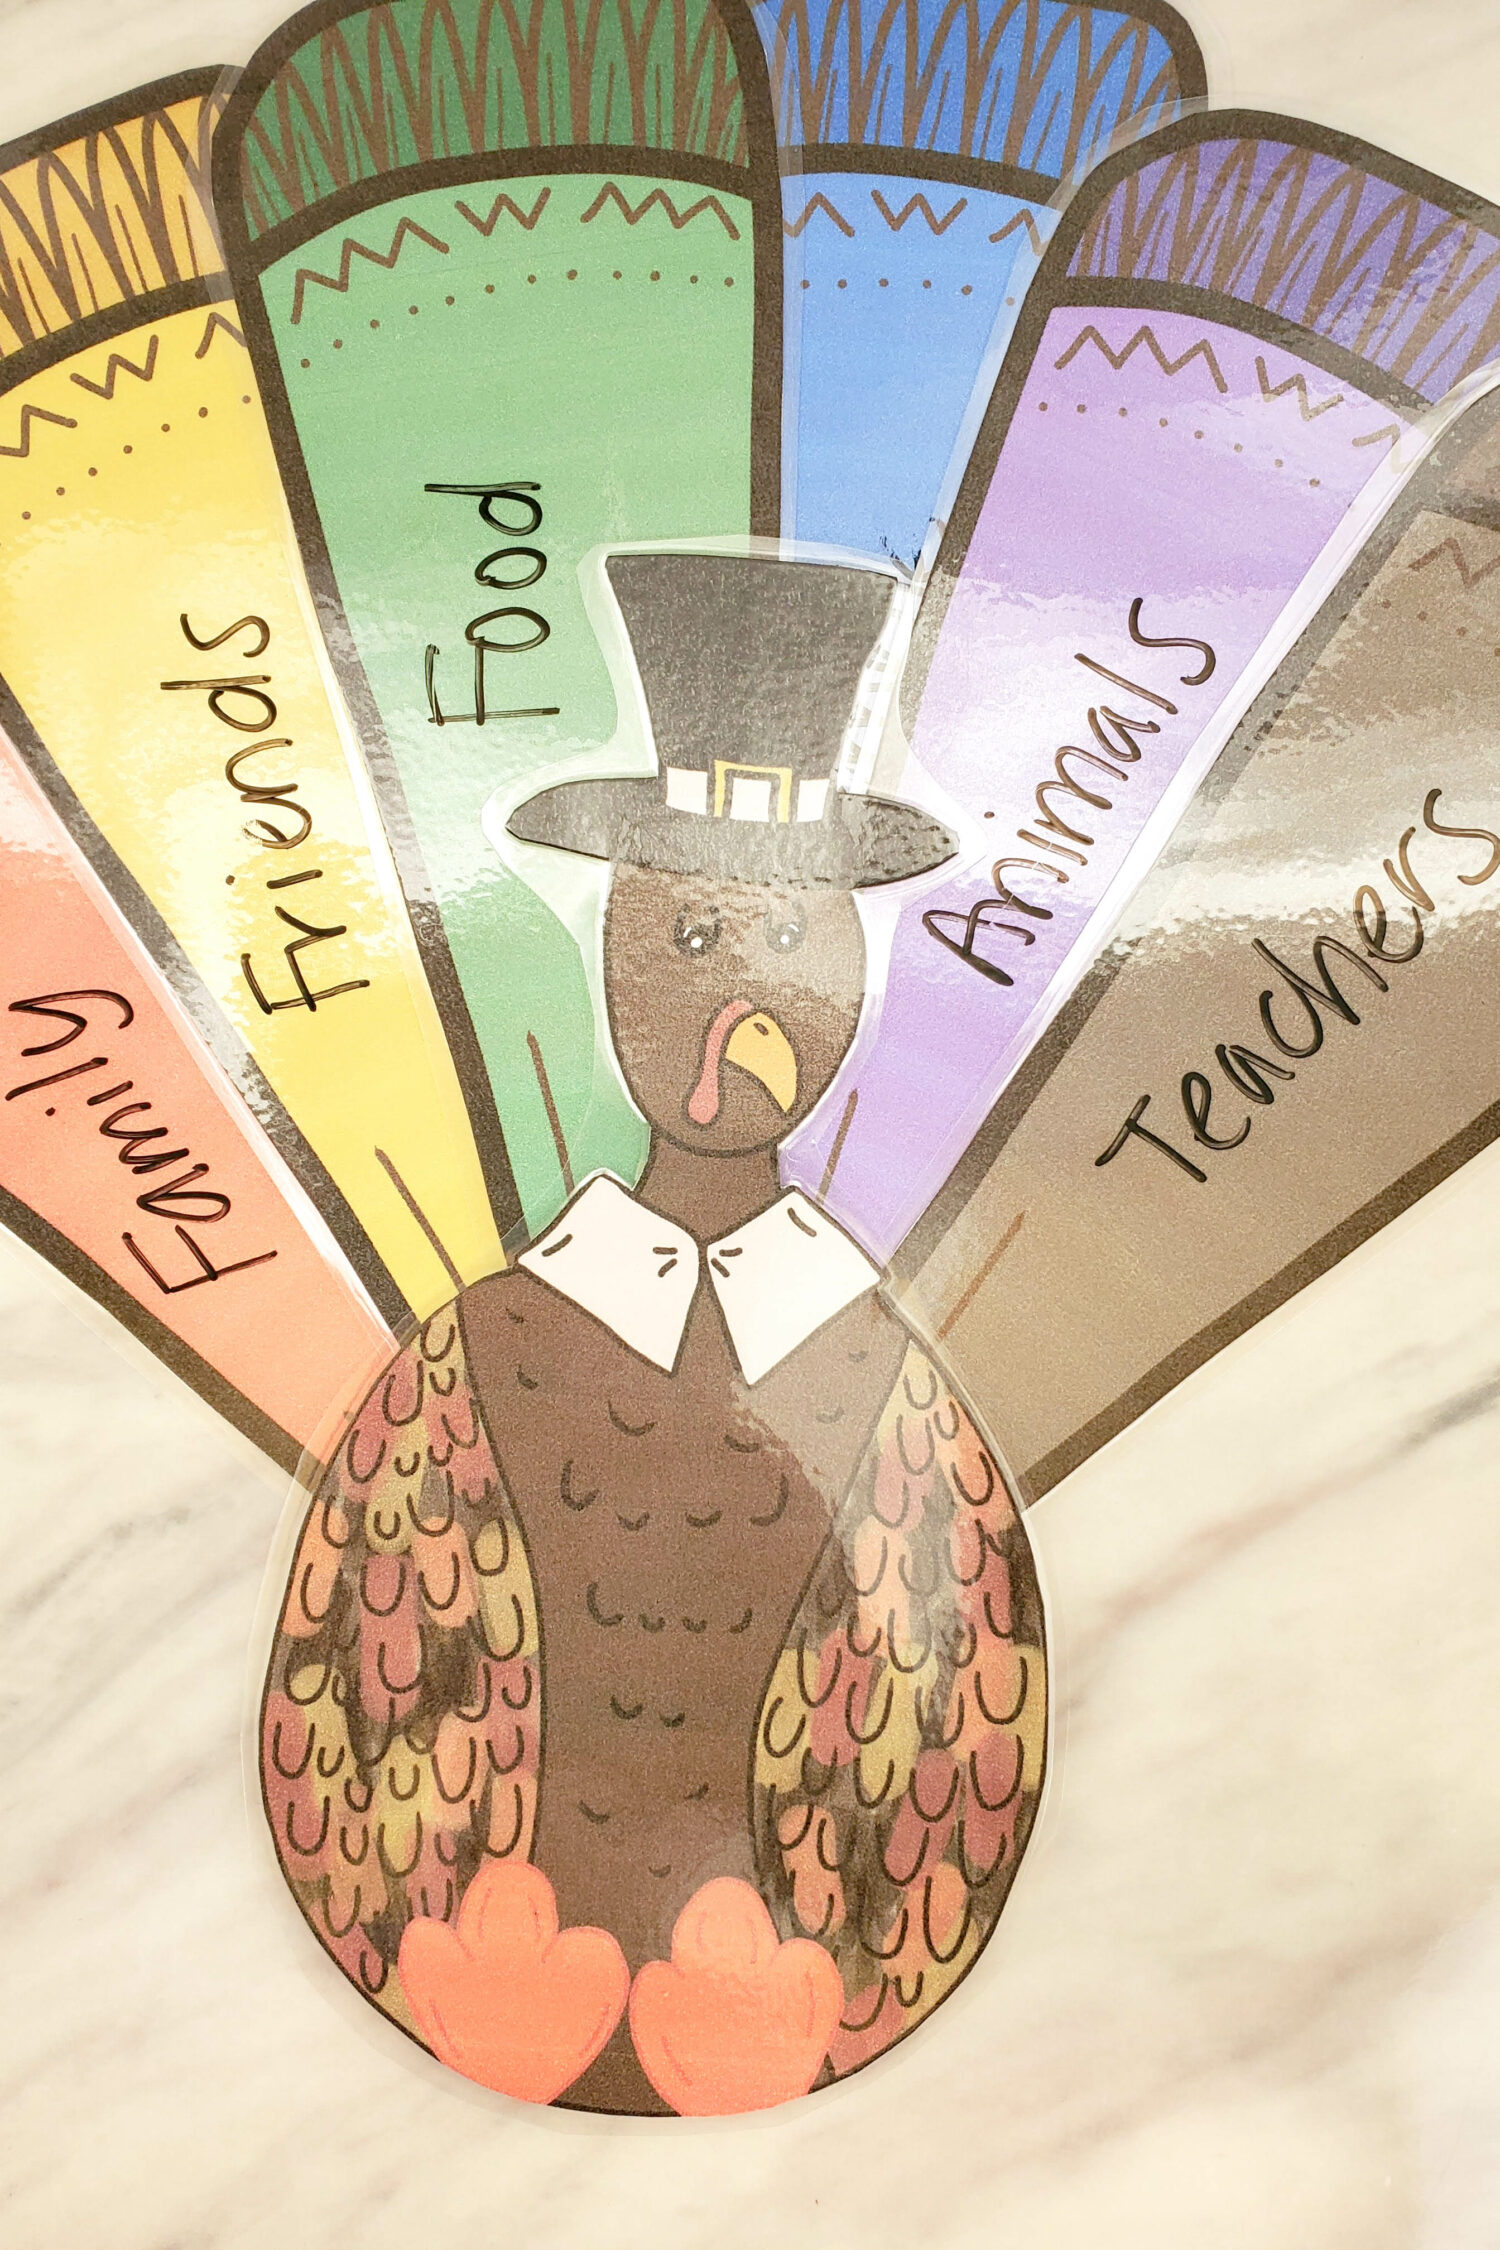 Thanksgiving Thankful Turkey printable singing time activity and lesson plan on gratitude and blessings! Fun and easy craft for kids or for your Primary class.